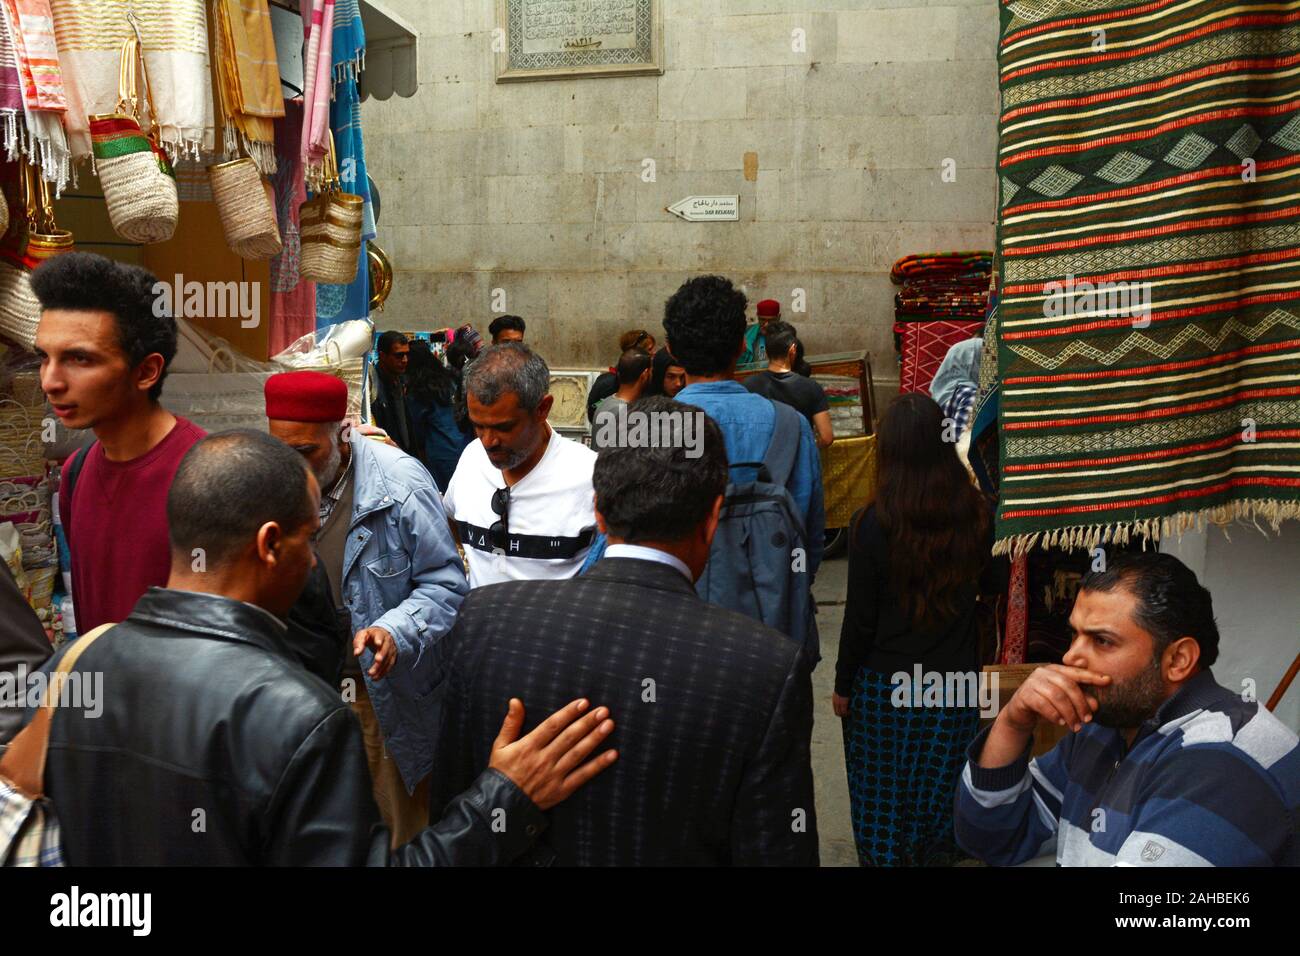 A crowd of local Tunisians walk past souvenir shops in the souk of the Kasbah district of the Medina (old city) of Tunis, Tunisia. Stock Photo